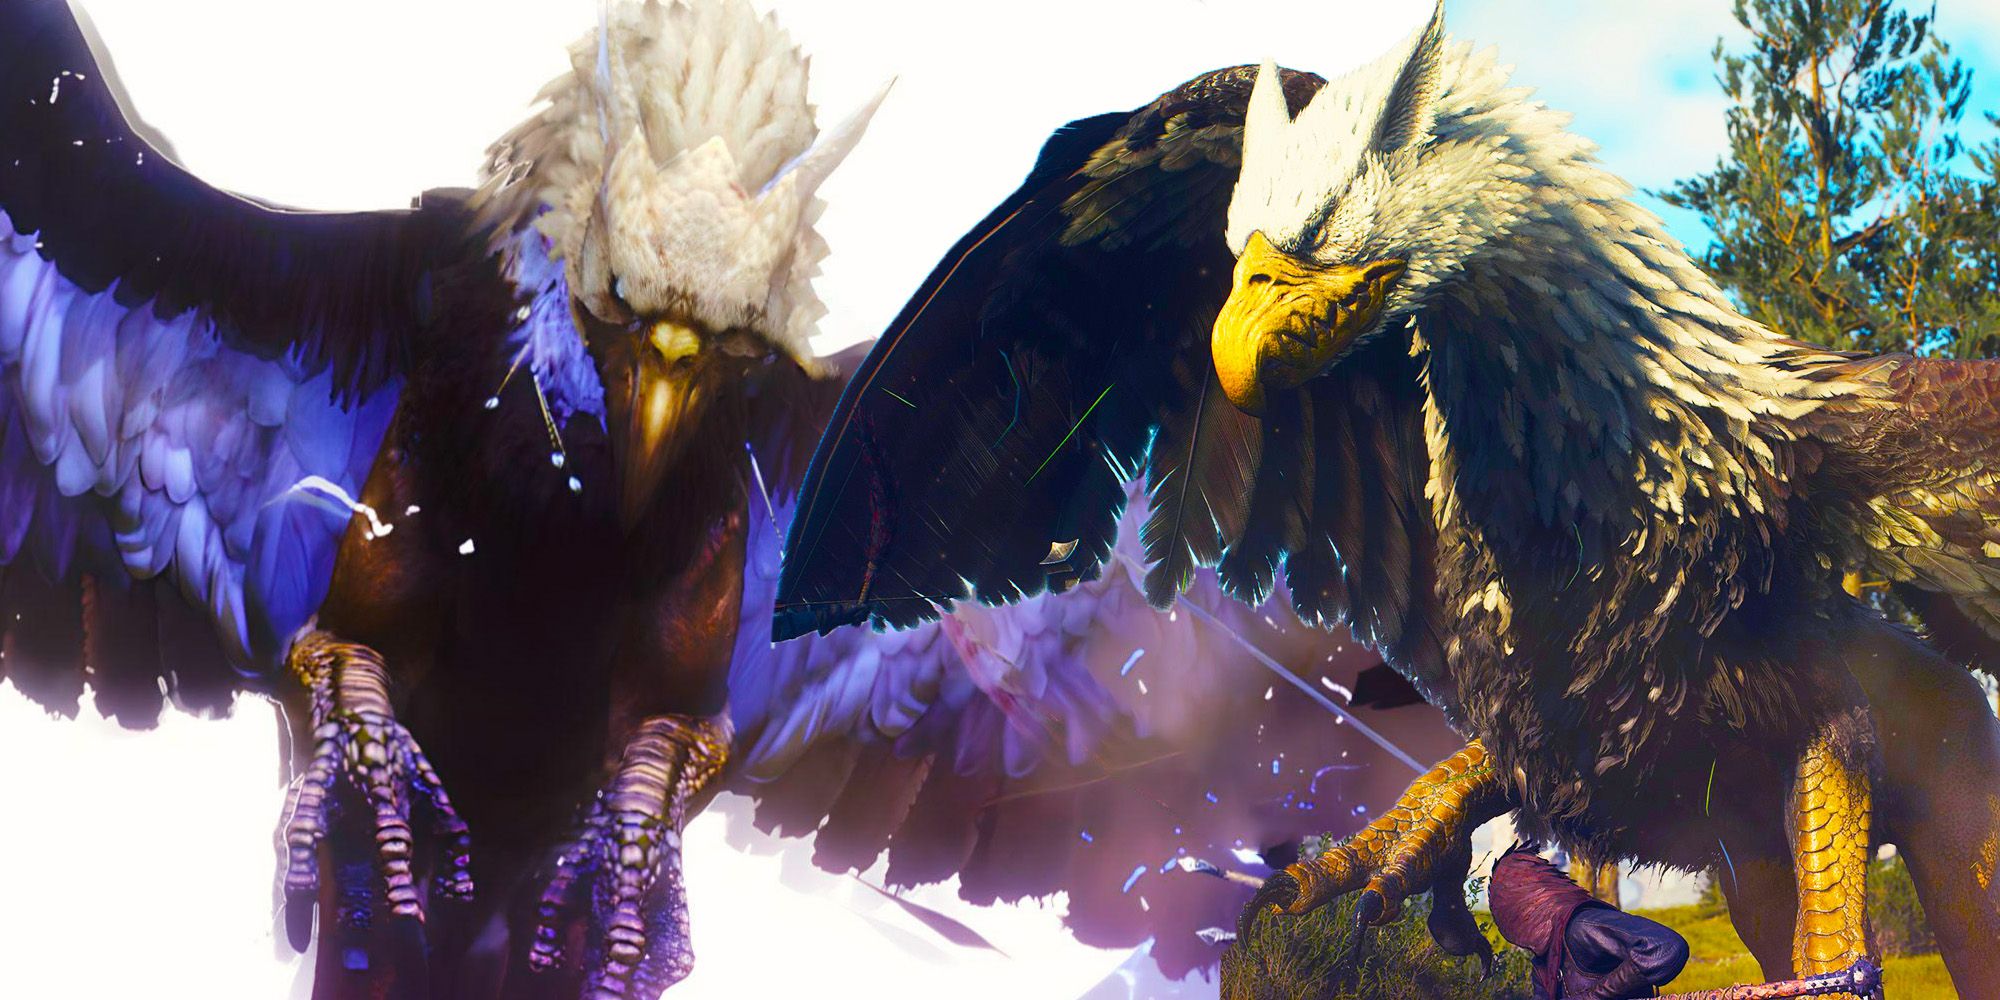 Griffins from Dragon’s Dogma 2, posed dramatically and seen from different angles.